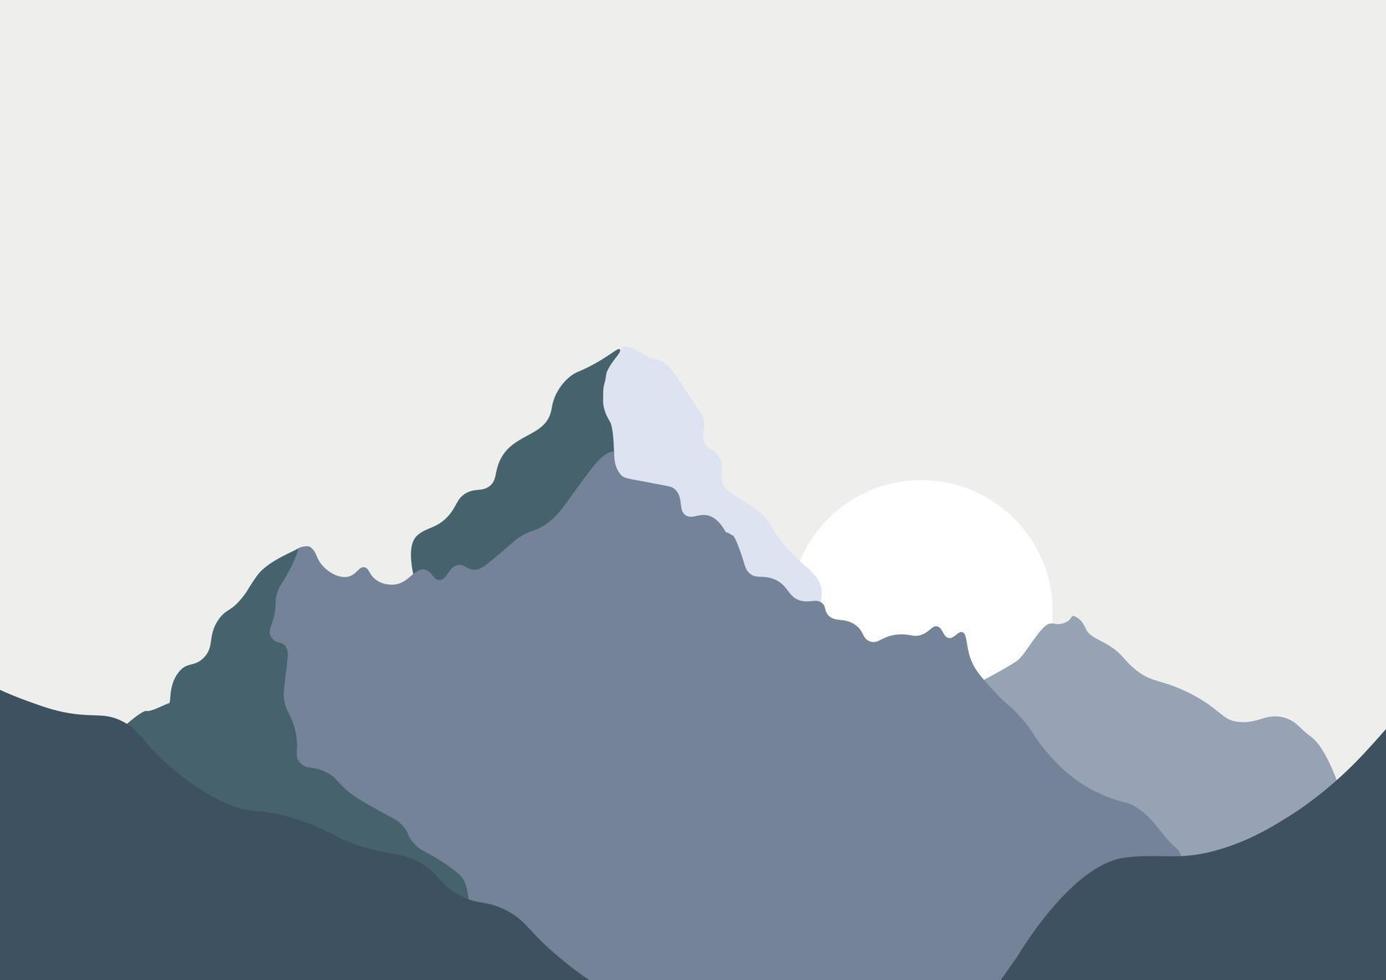 The Mountains Abstract Landscape vector